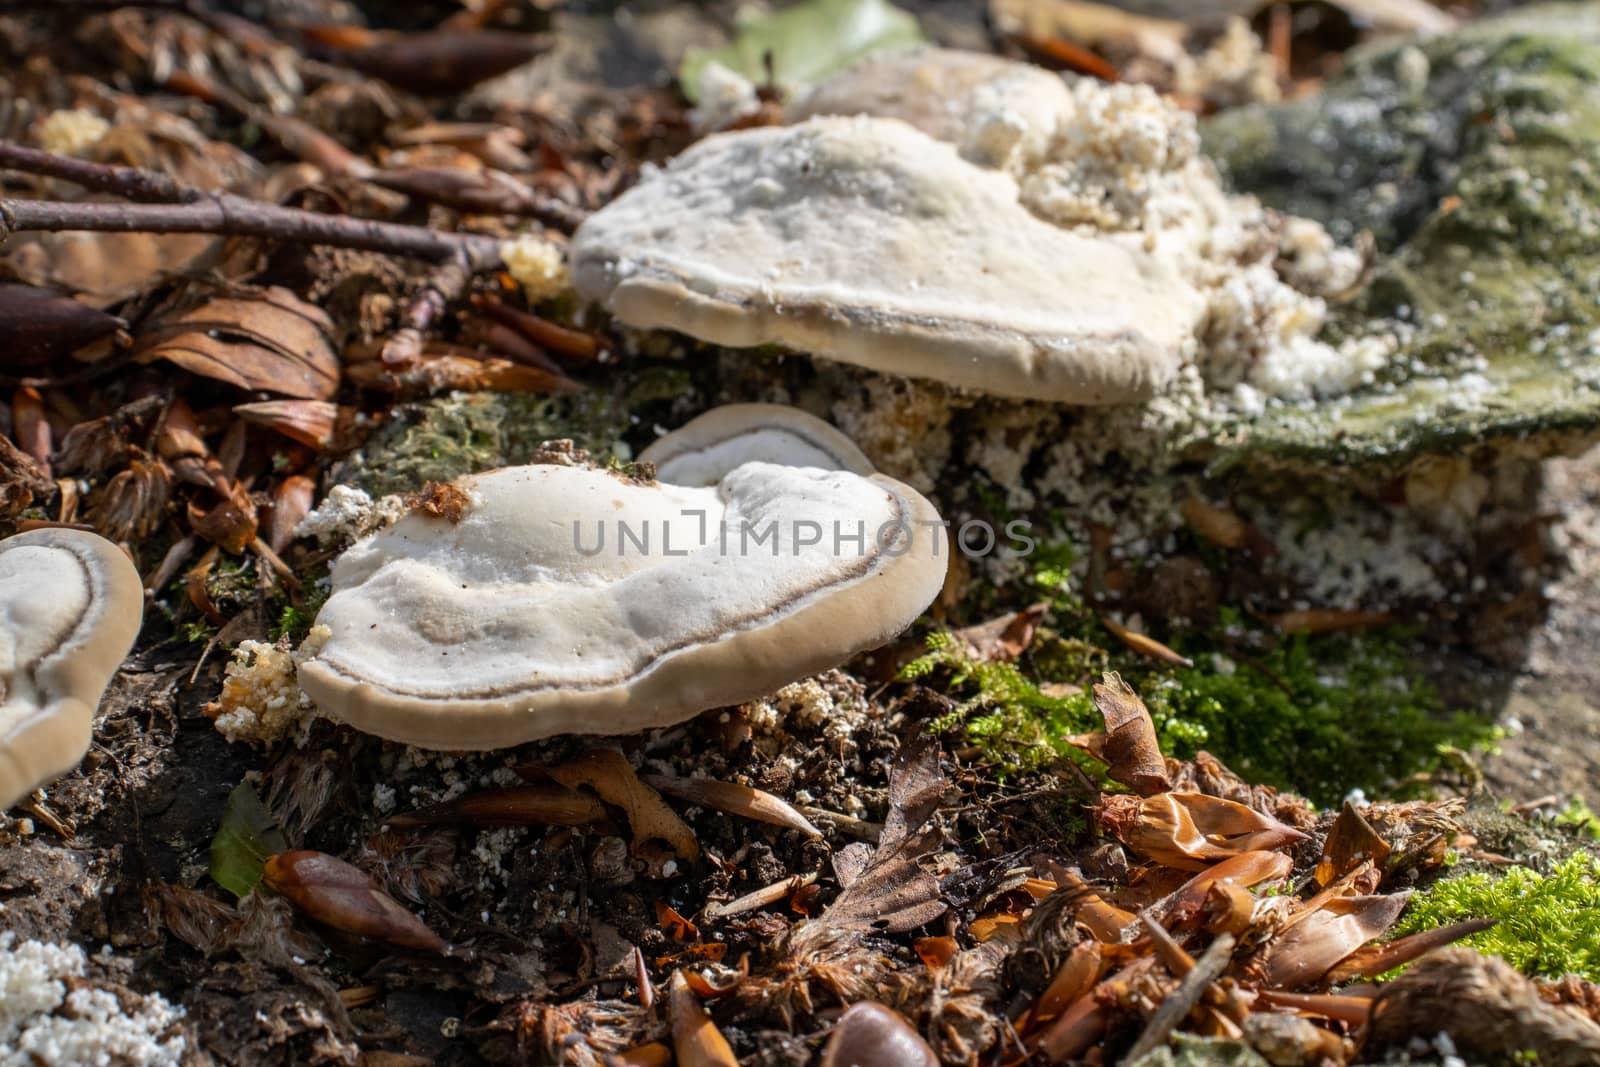 white woody mushroom, mushrooms coming out of a tree trunk in the forest by Andreajk3